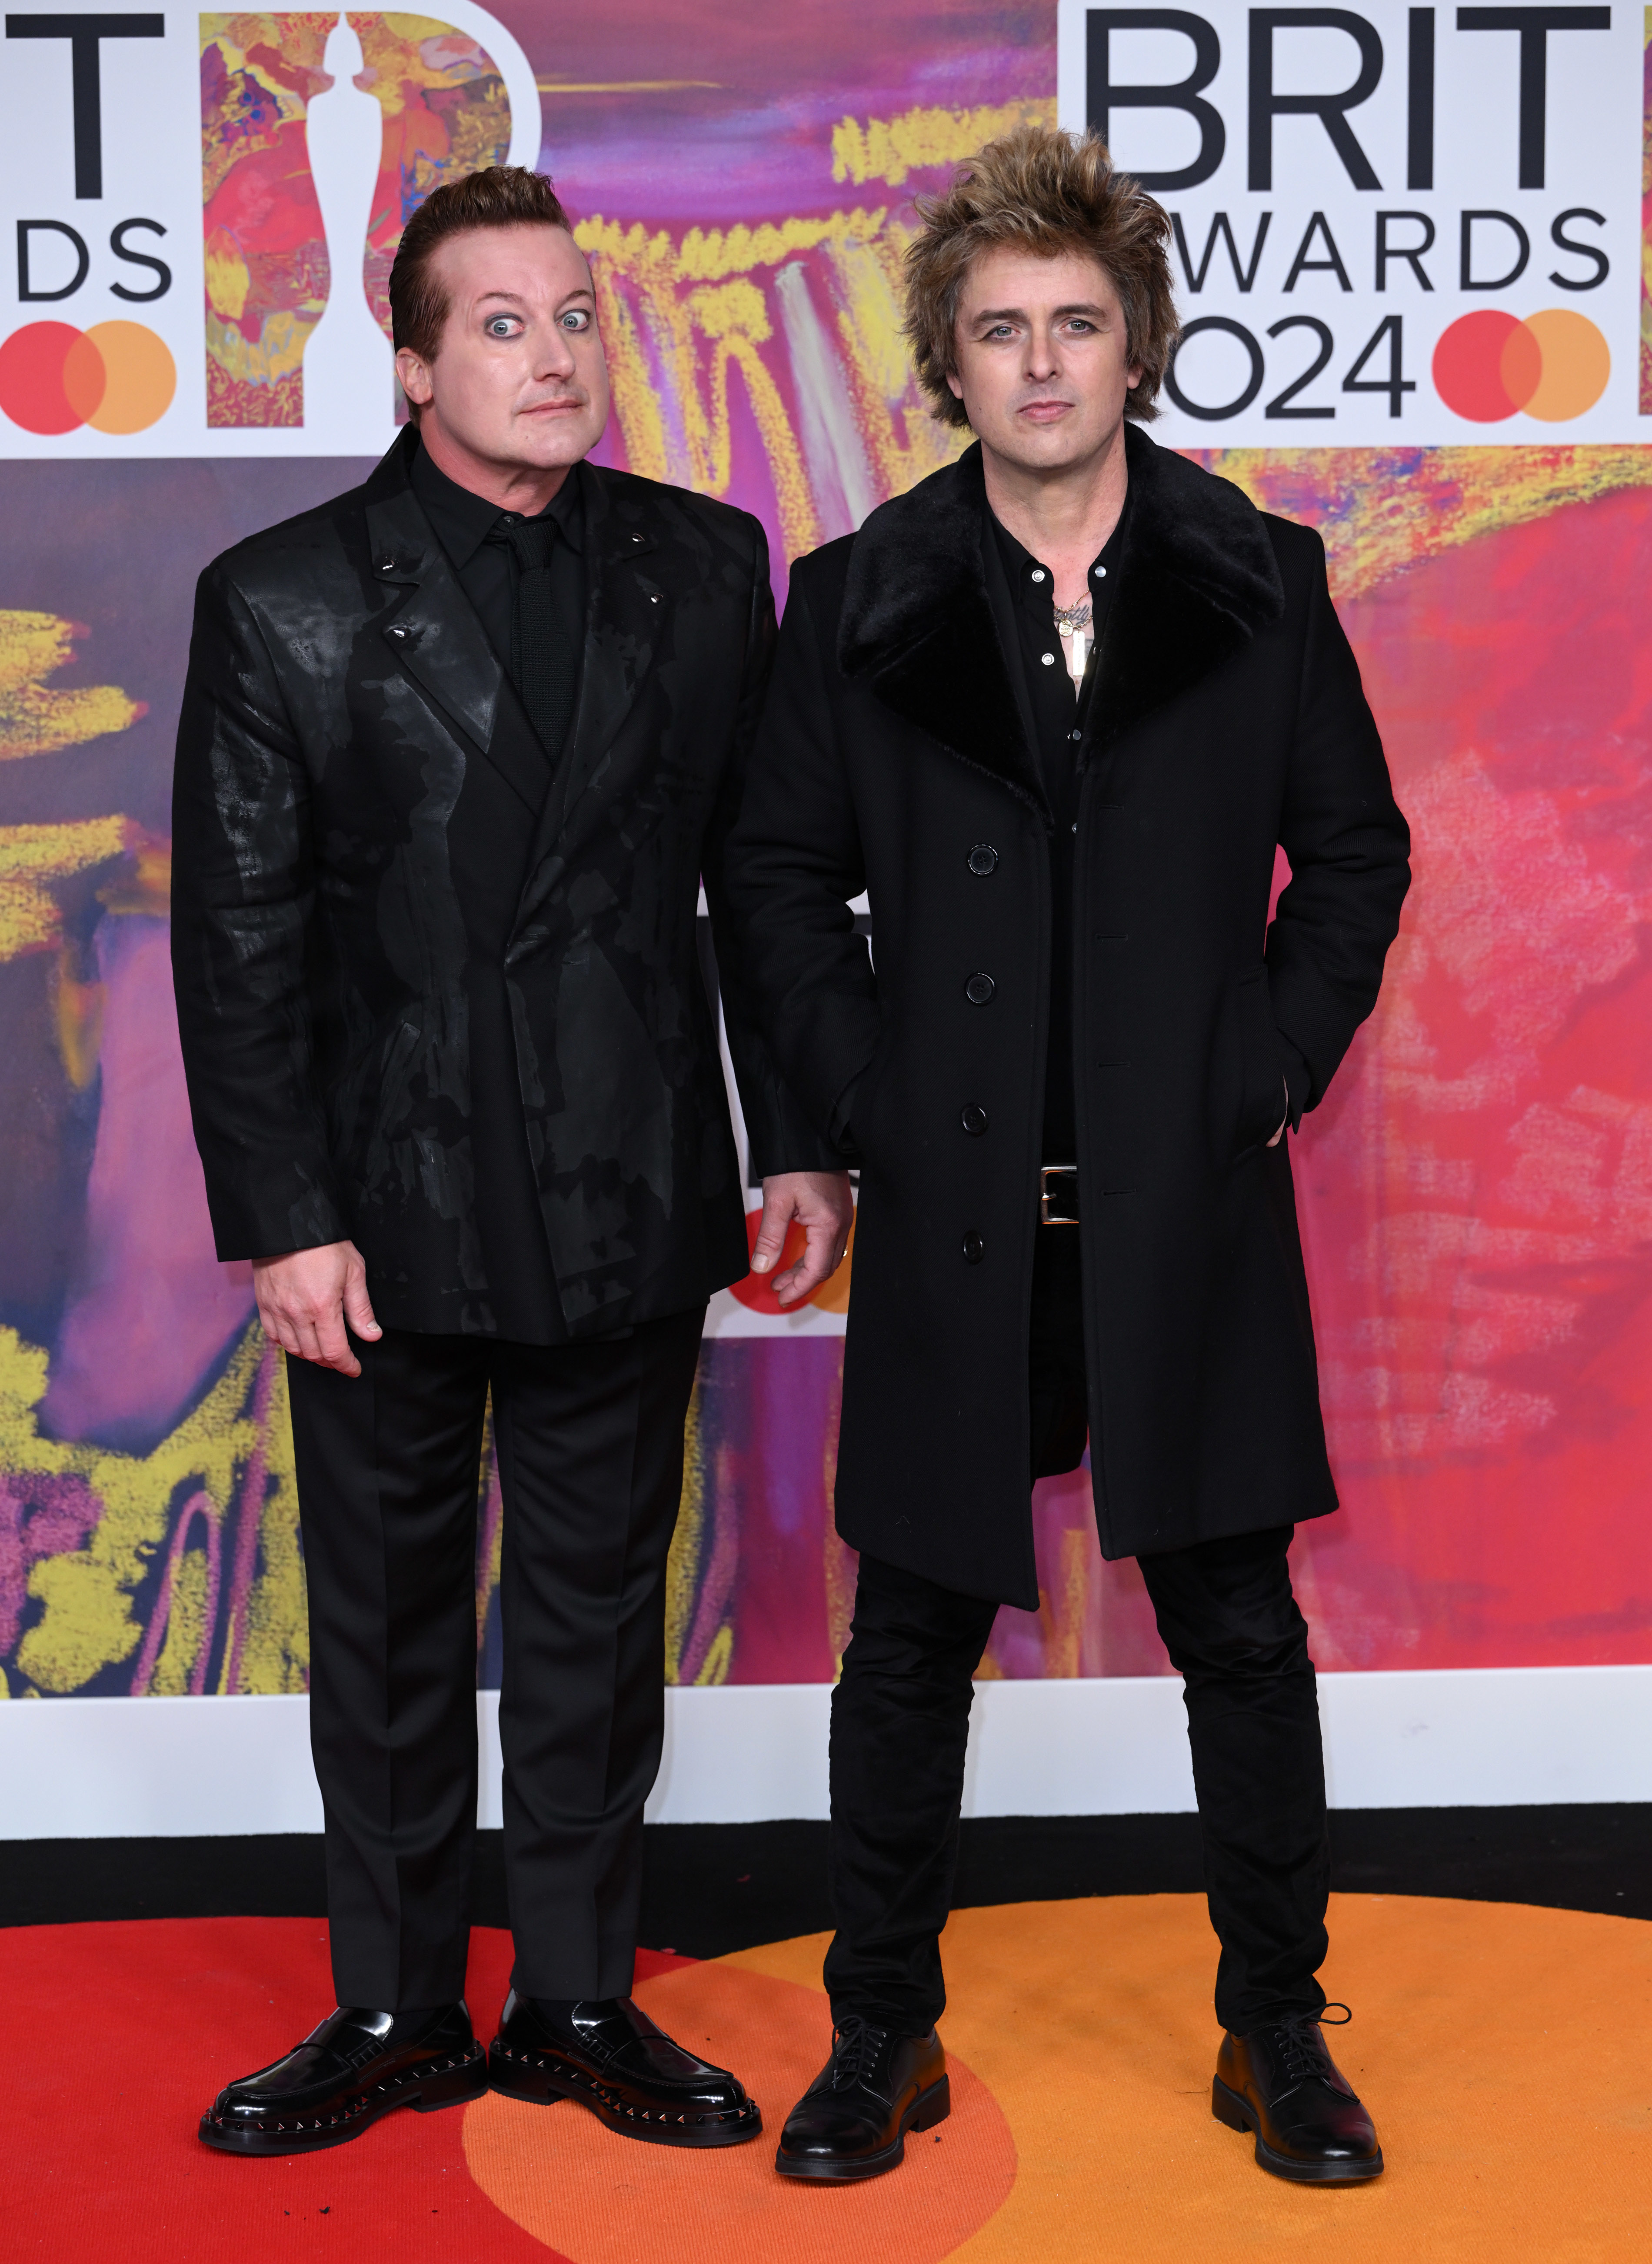 Tré Cool and Billie Joe Armstrong of Green Day